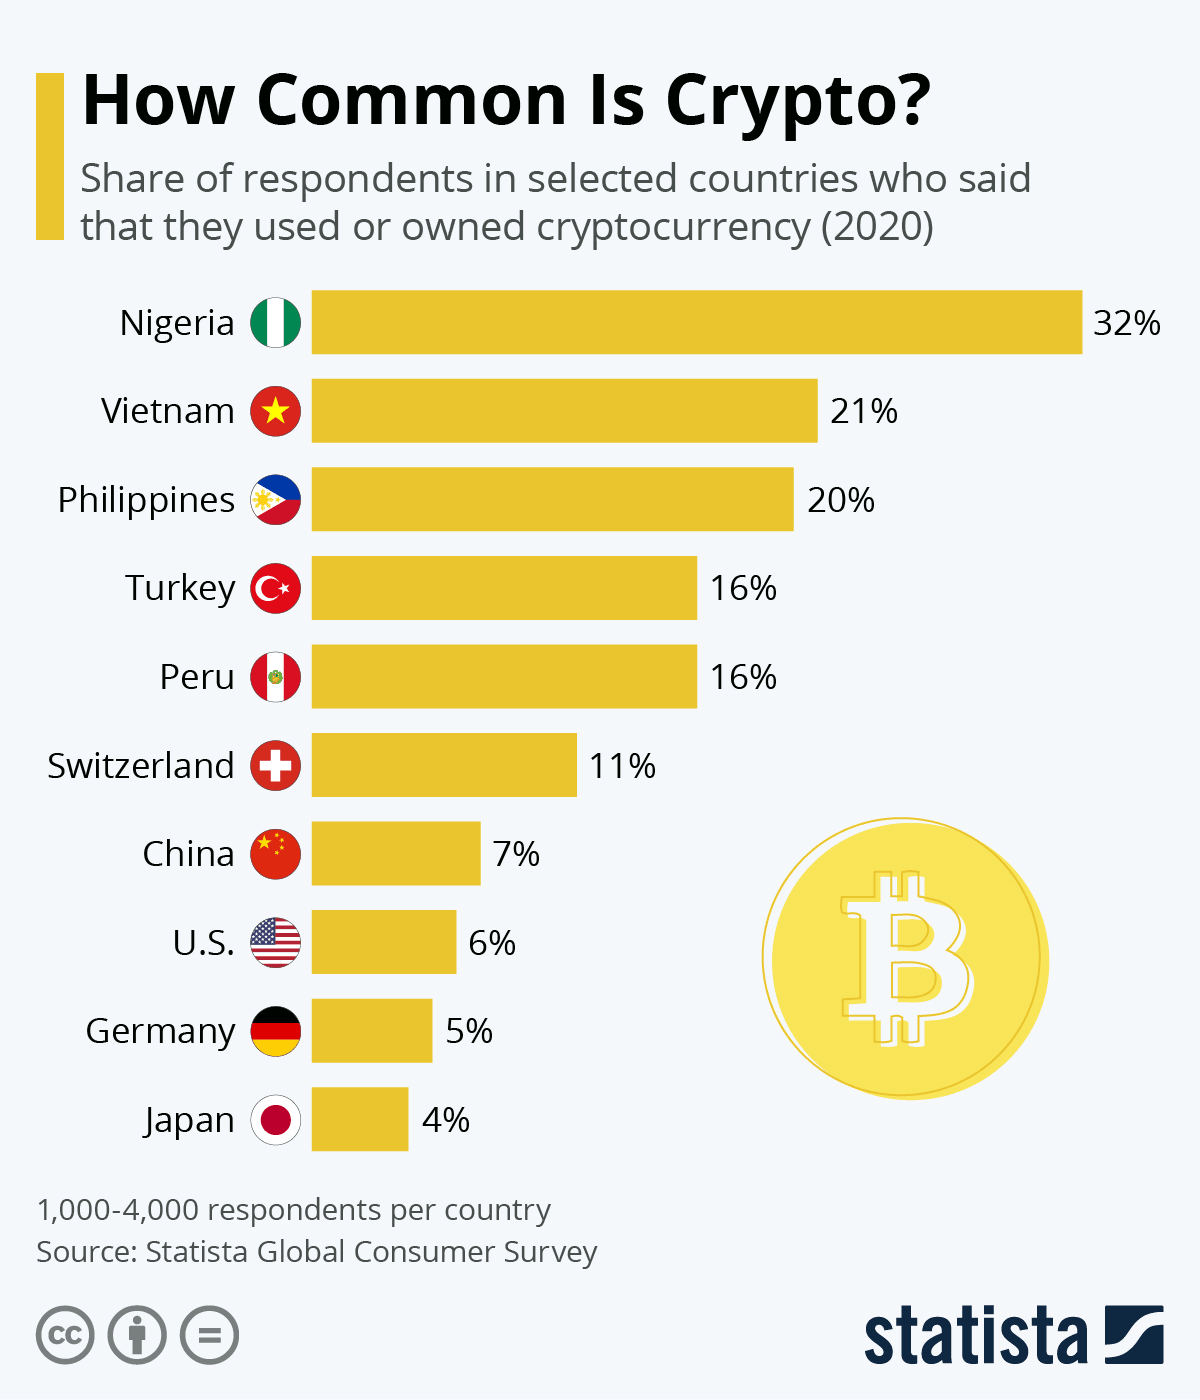 How common is crypto?